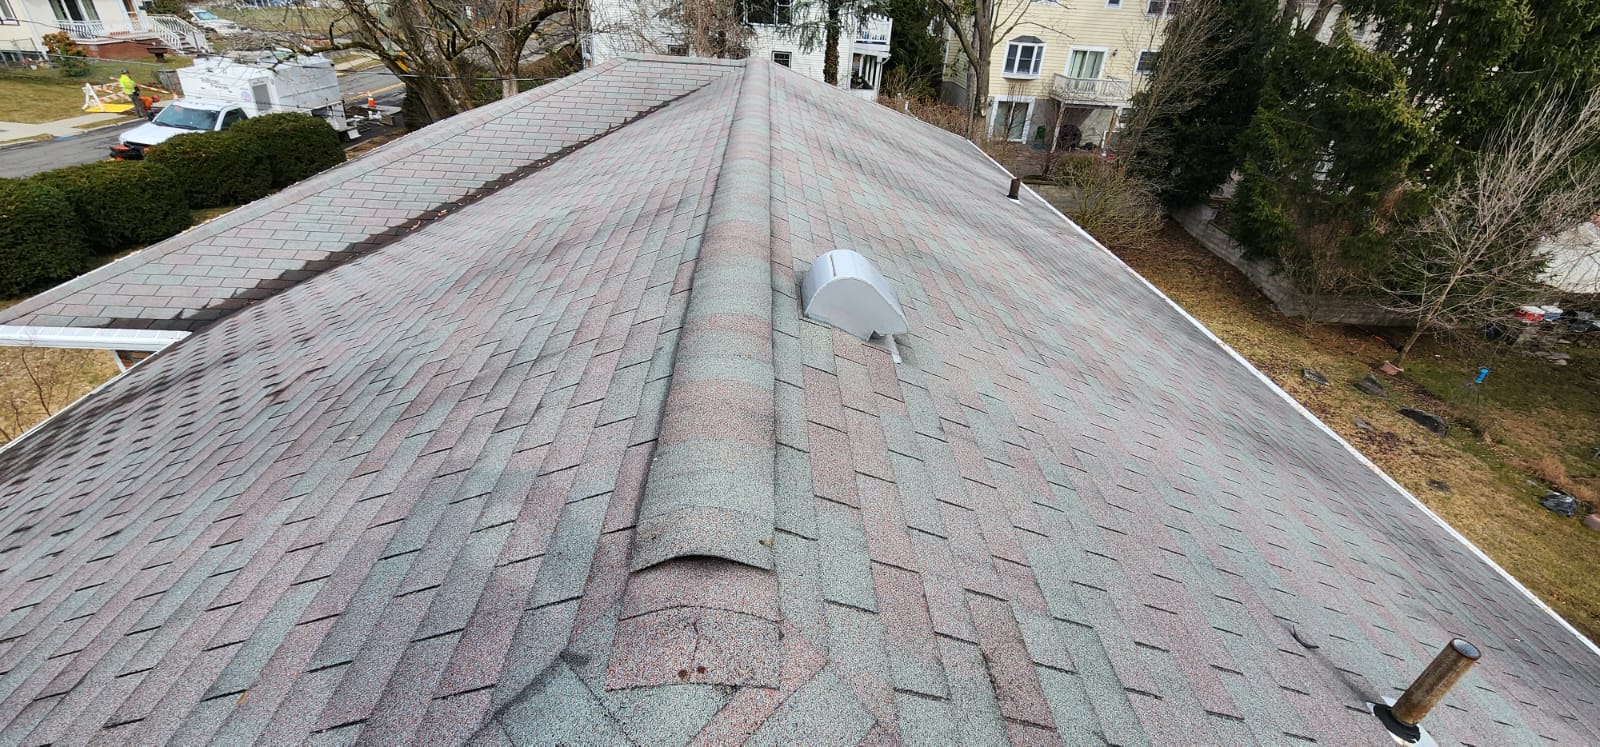 Shingle Roof Replacement & Chimney Rebuilding in Dobbs Ferry Project Shot 6